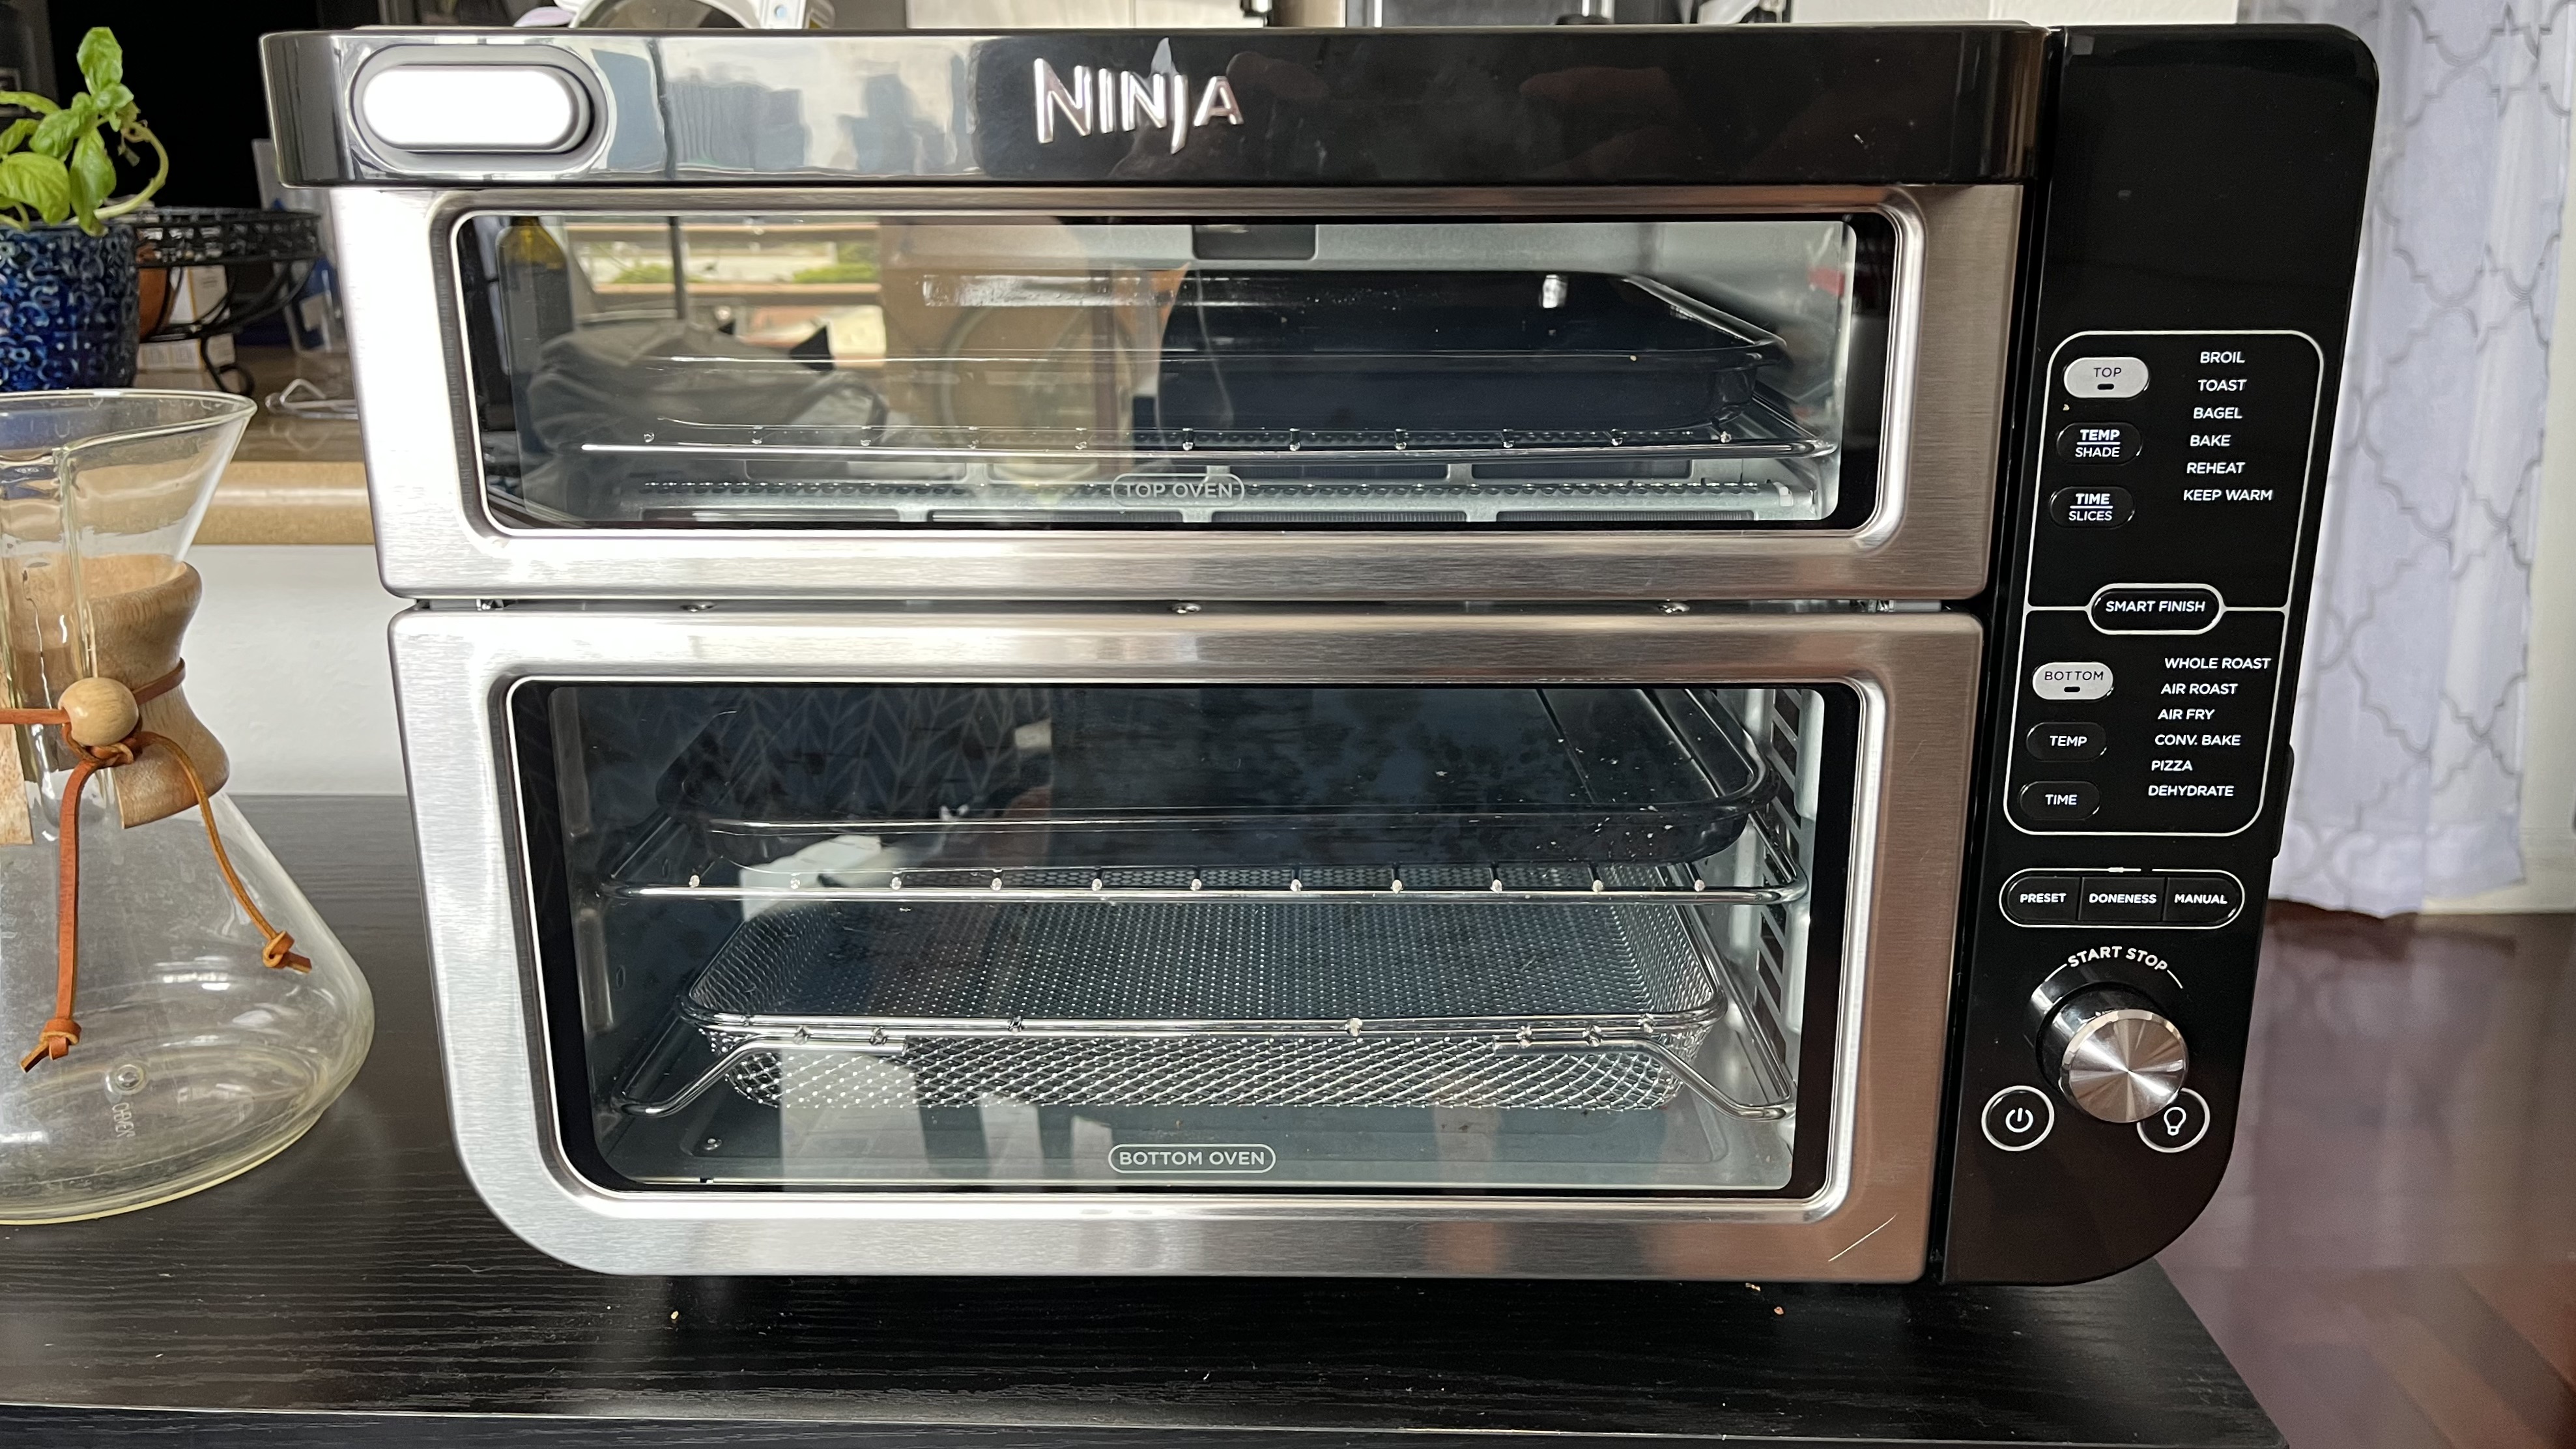 Ninja Double Oven air fryer review: a high-performing, roomy air fryer